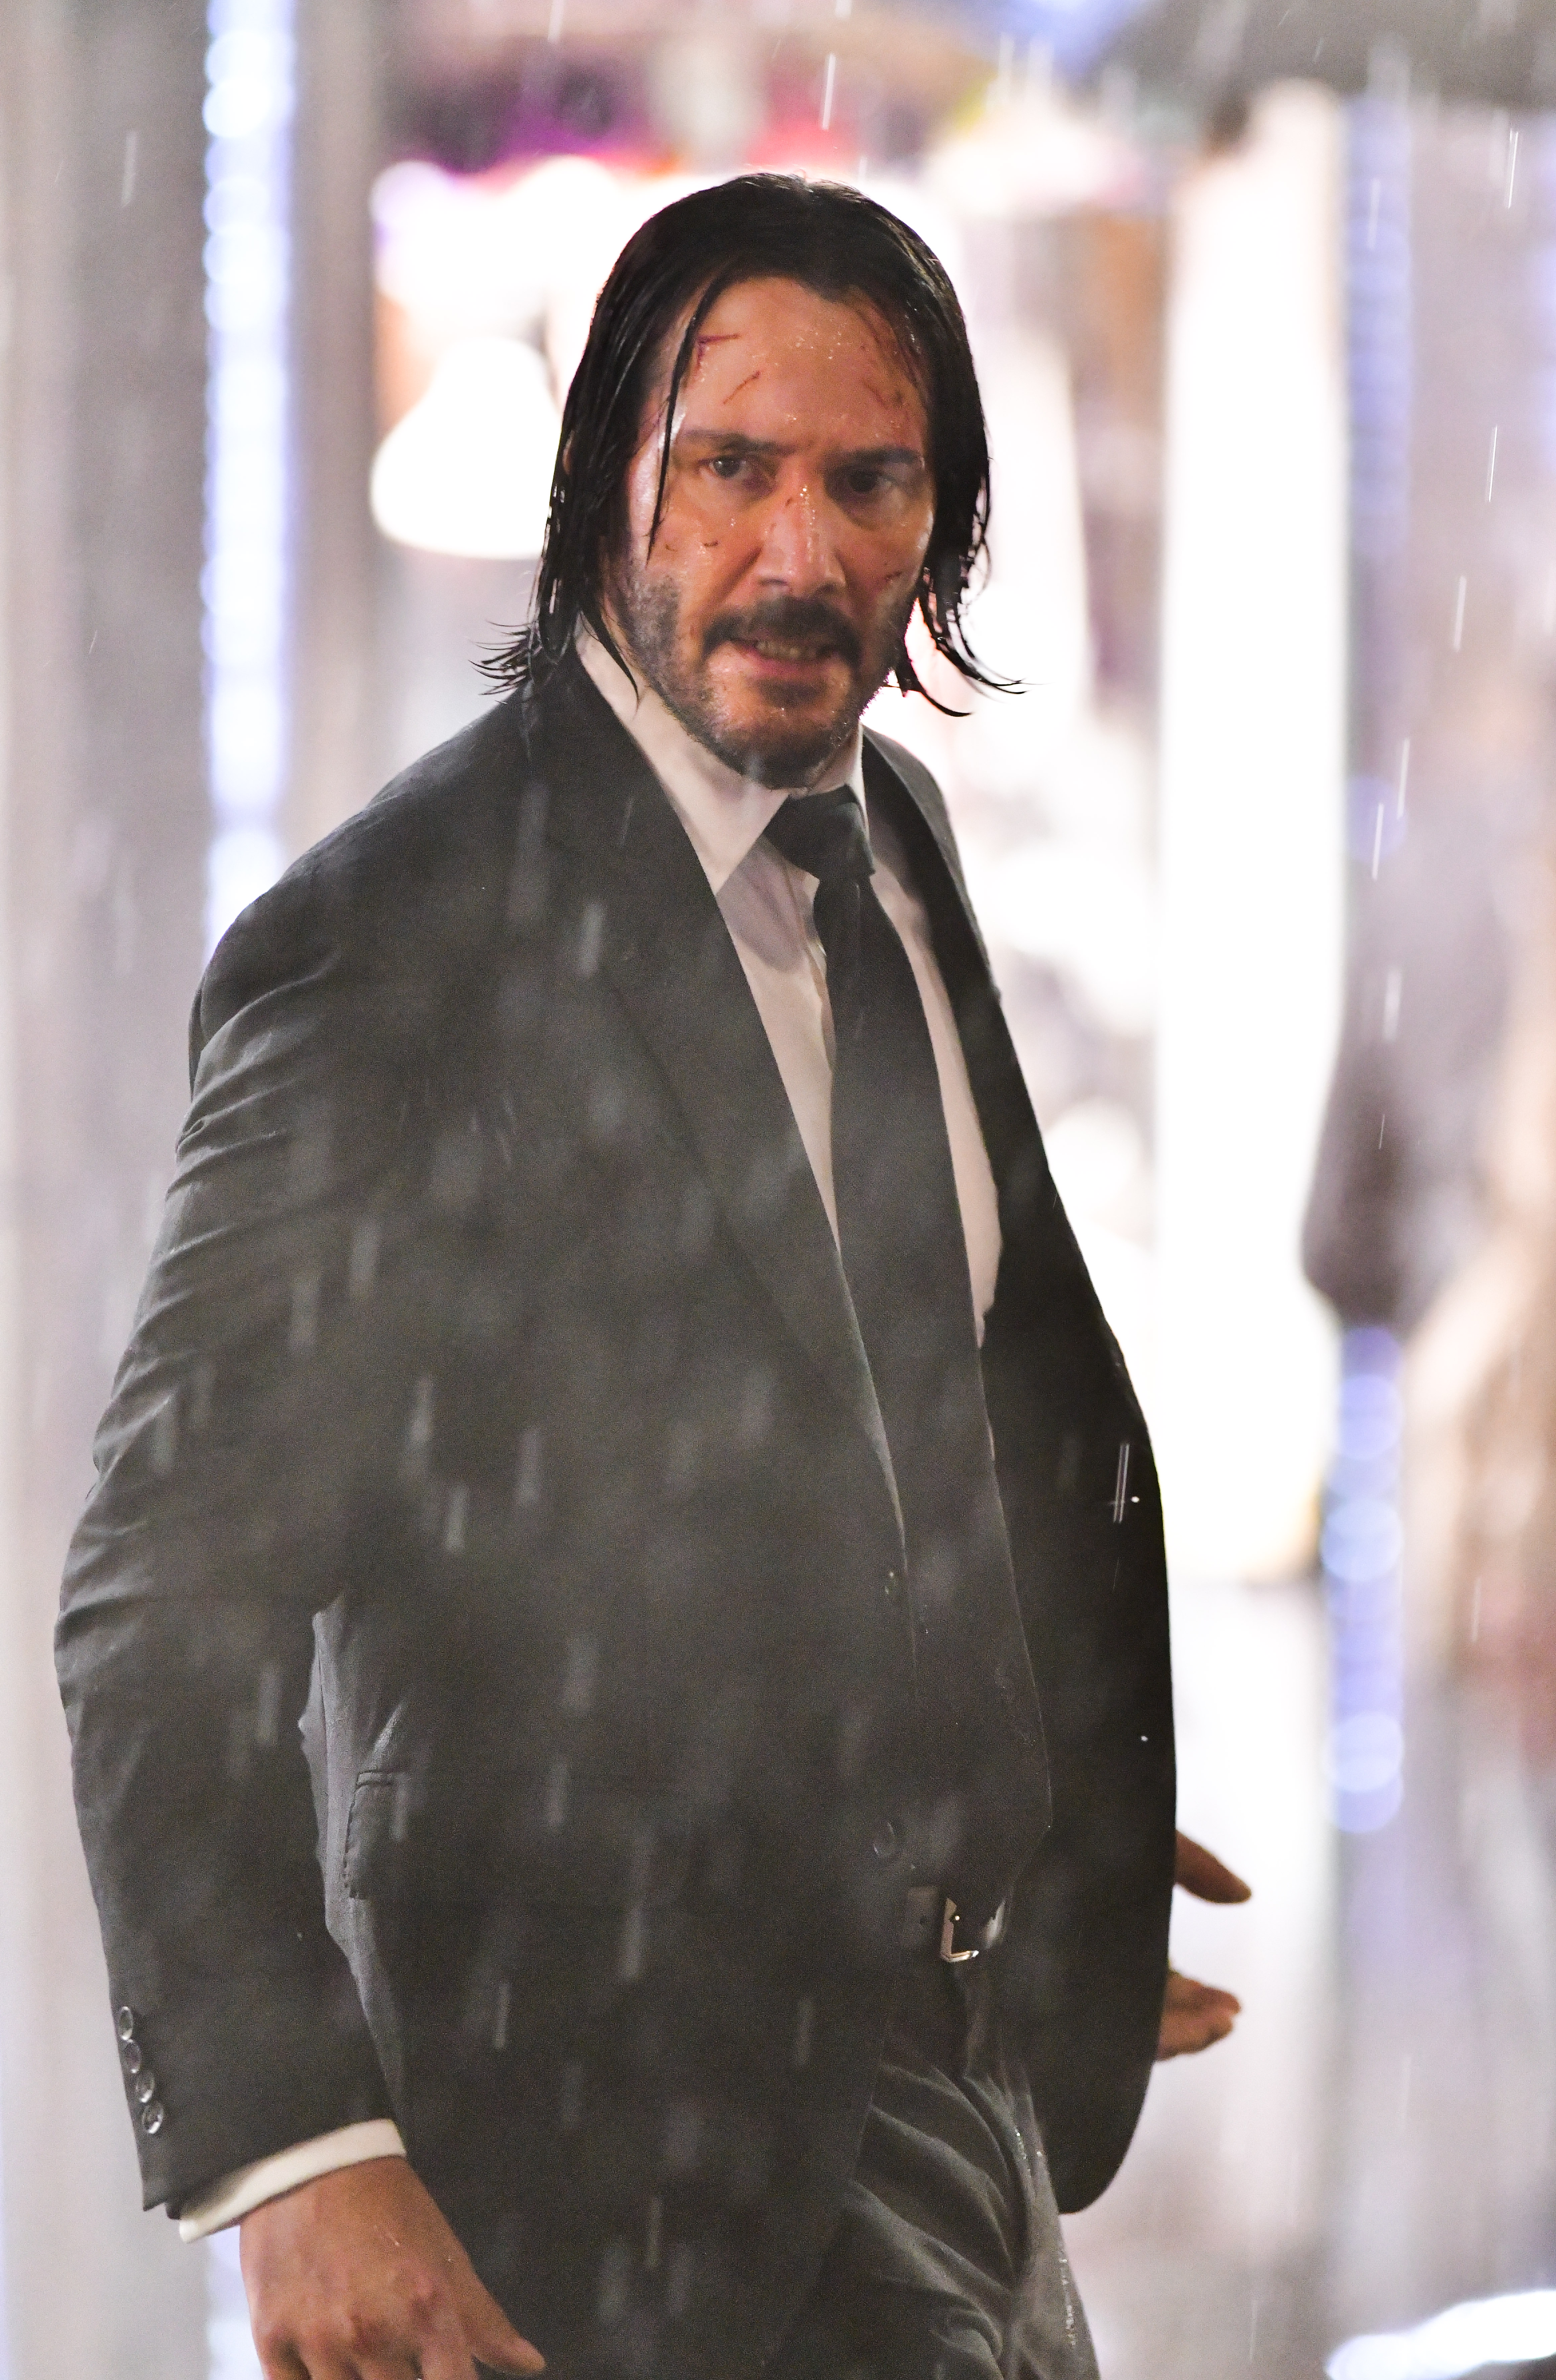 Keanu Reeves spotted out while filming "John Wick: Chapter 3 – Parabellum" in New York City on July 9, 2018 | Source: Getty Images